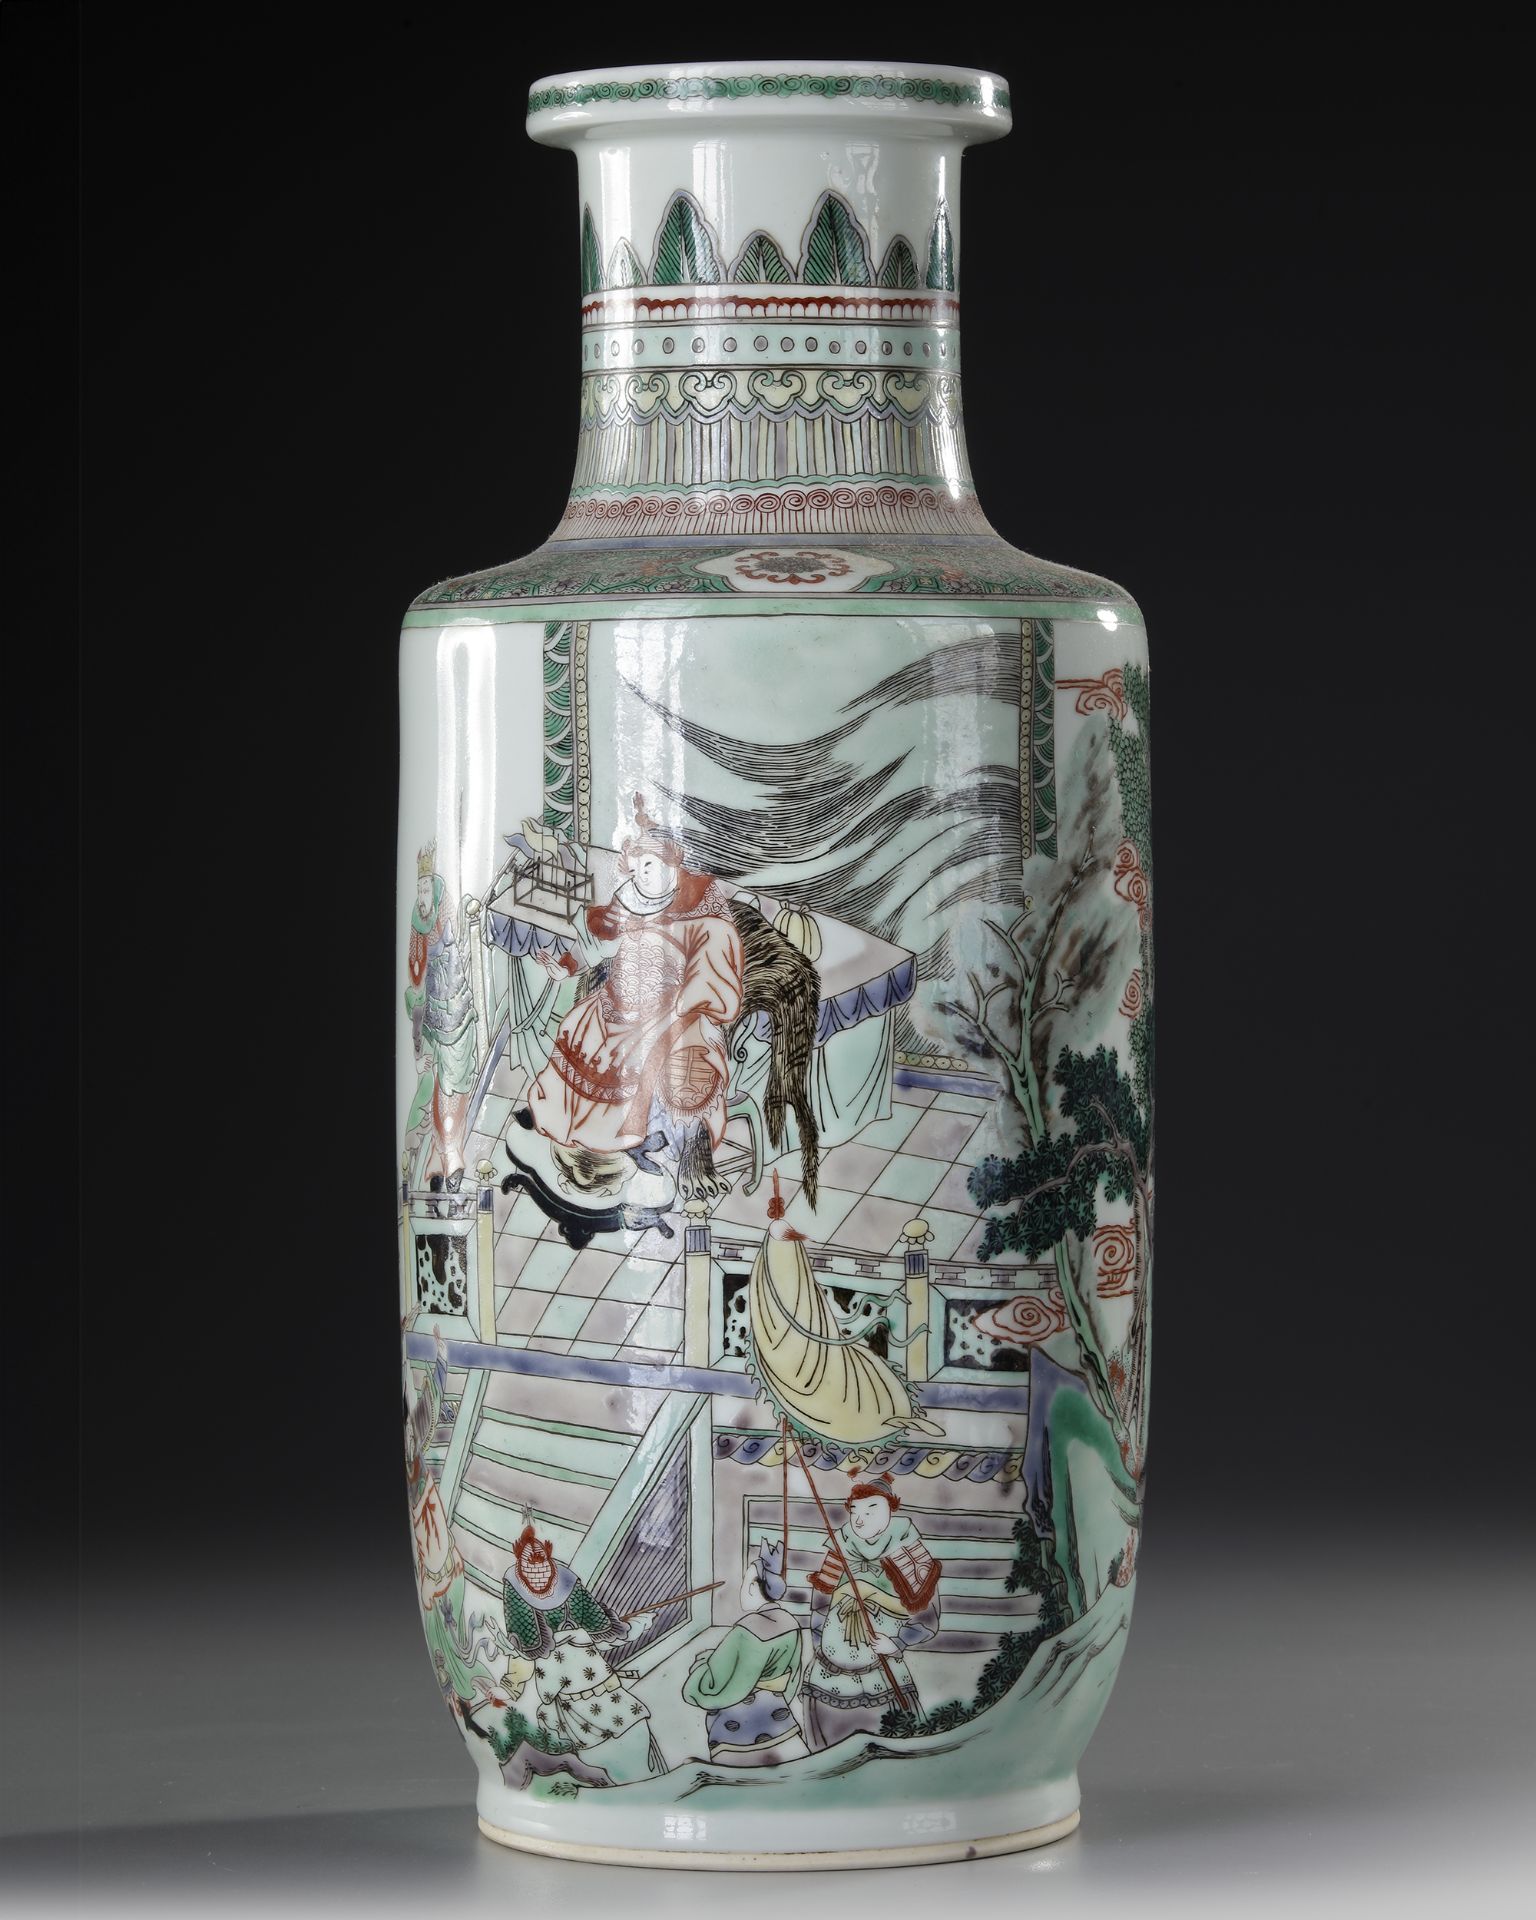 A CHINESE FAMILLE-VERTE ROULEAU VASE, QING DYNASTY (1644-1911)